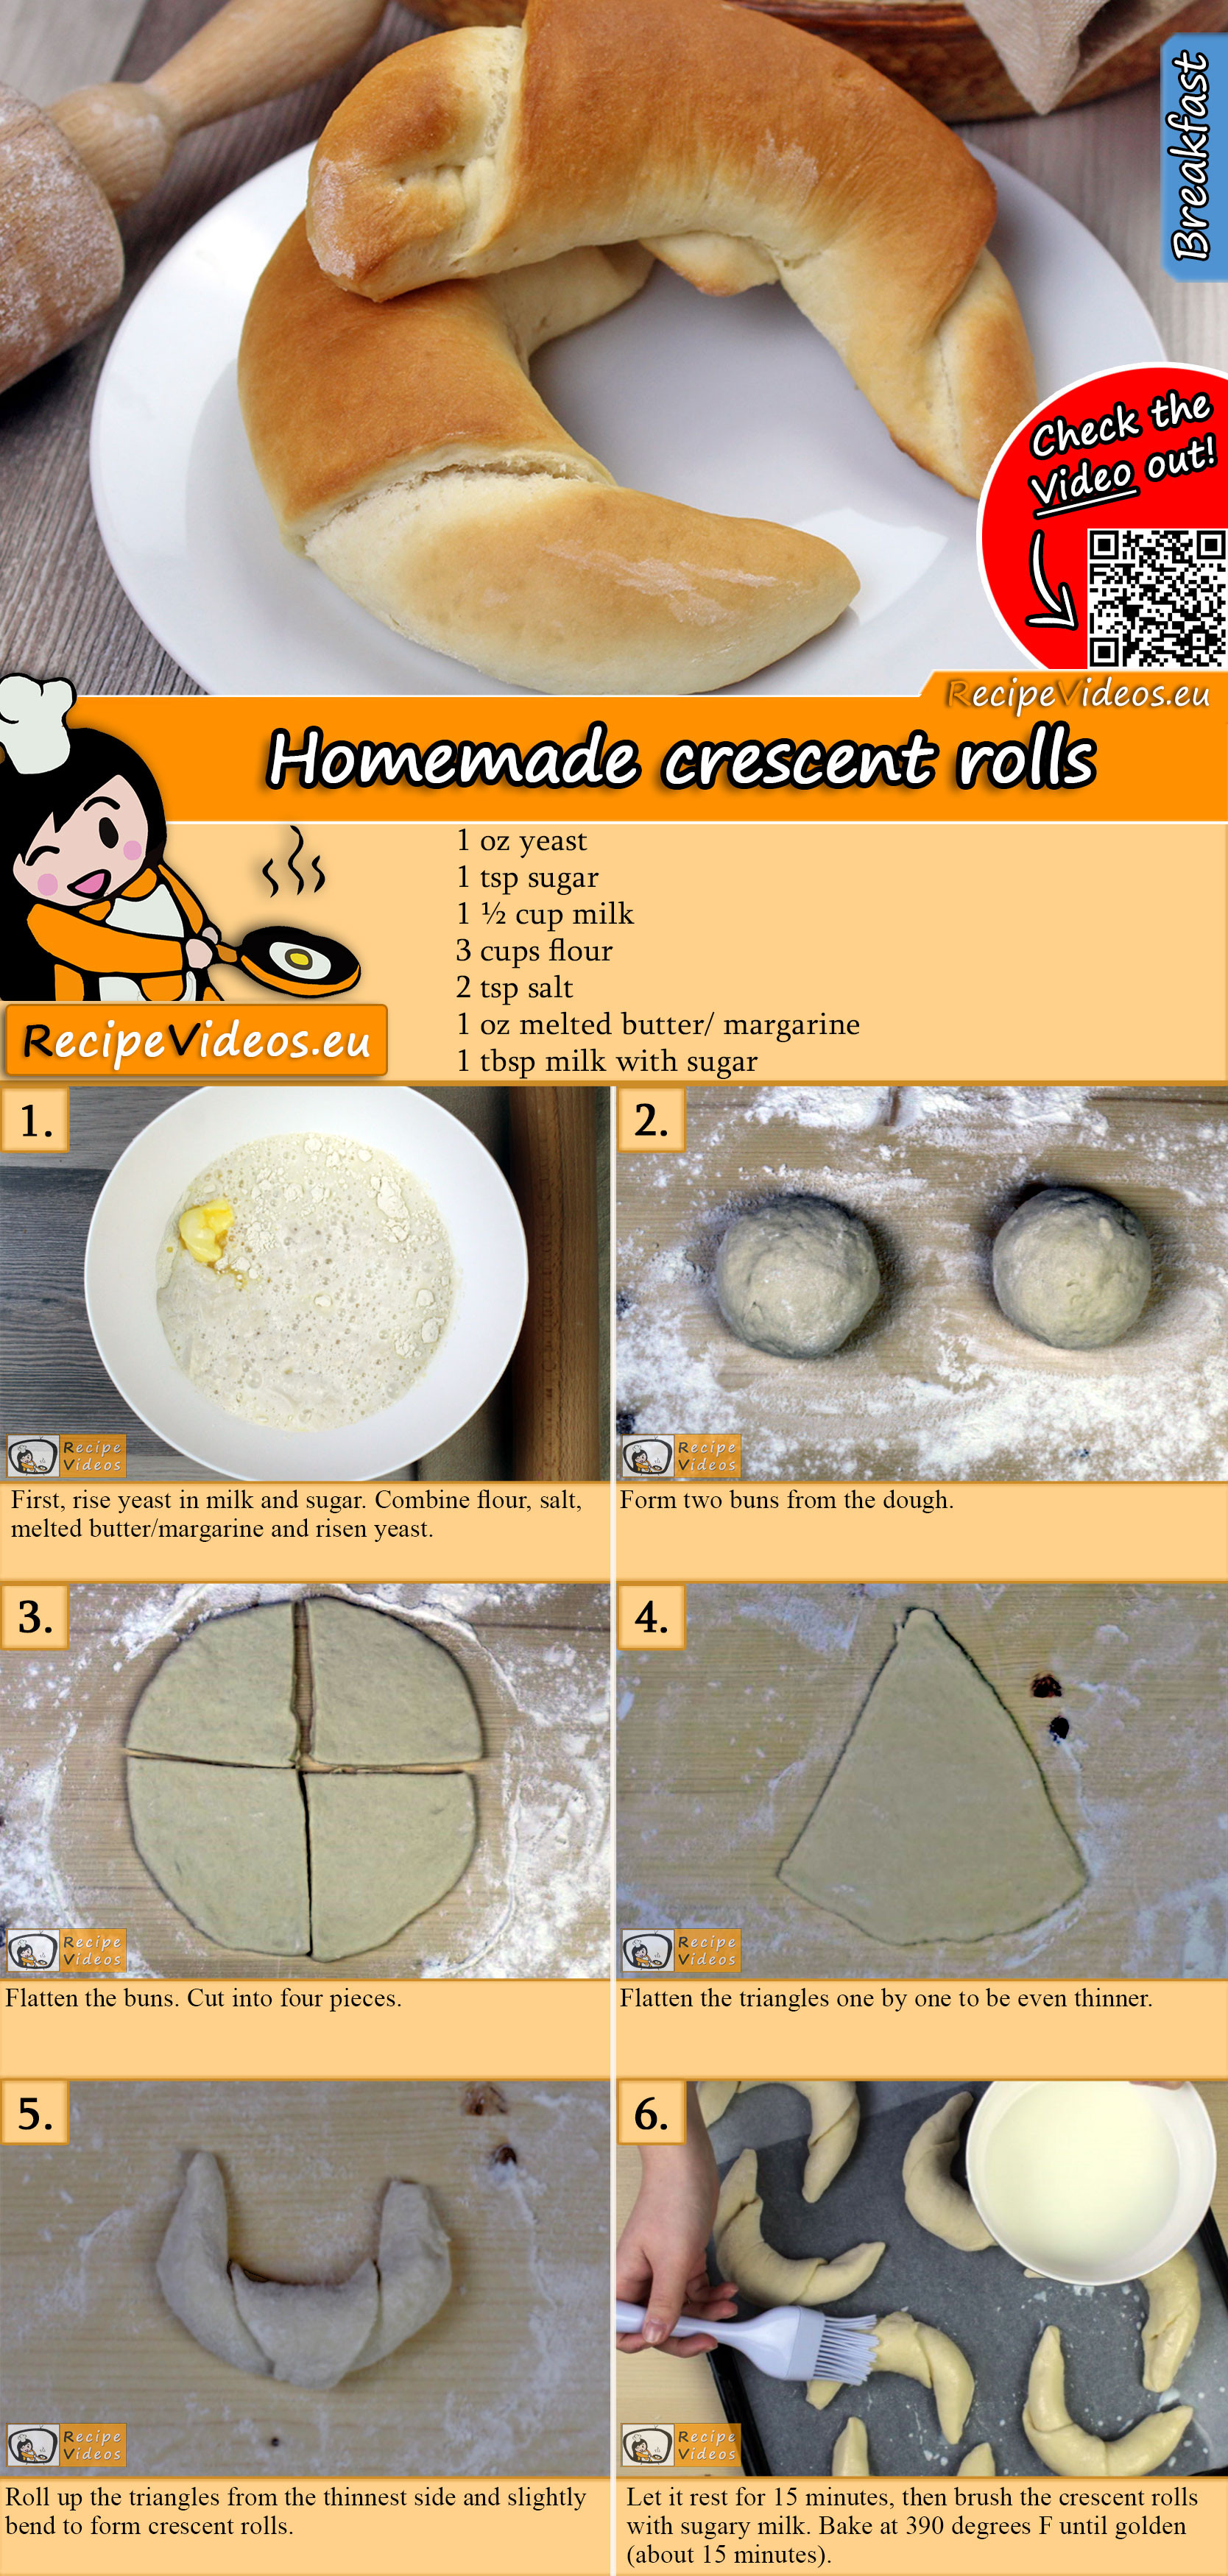 Homemade crescent rolls recipe with video